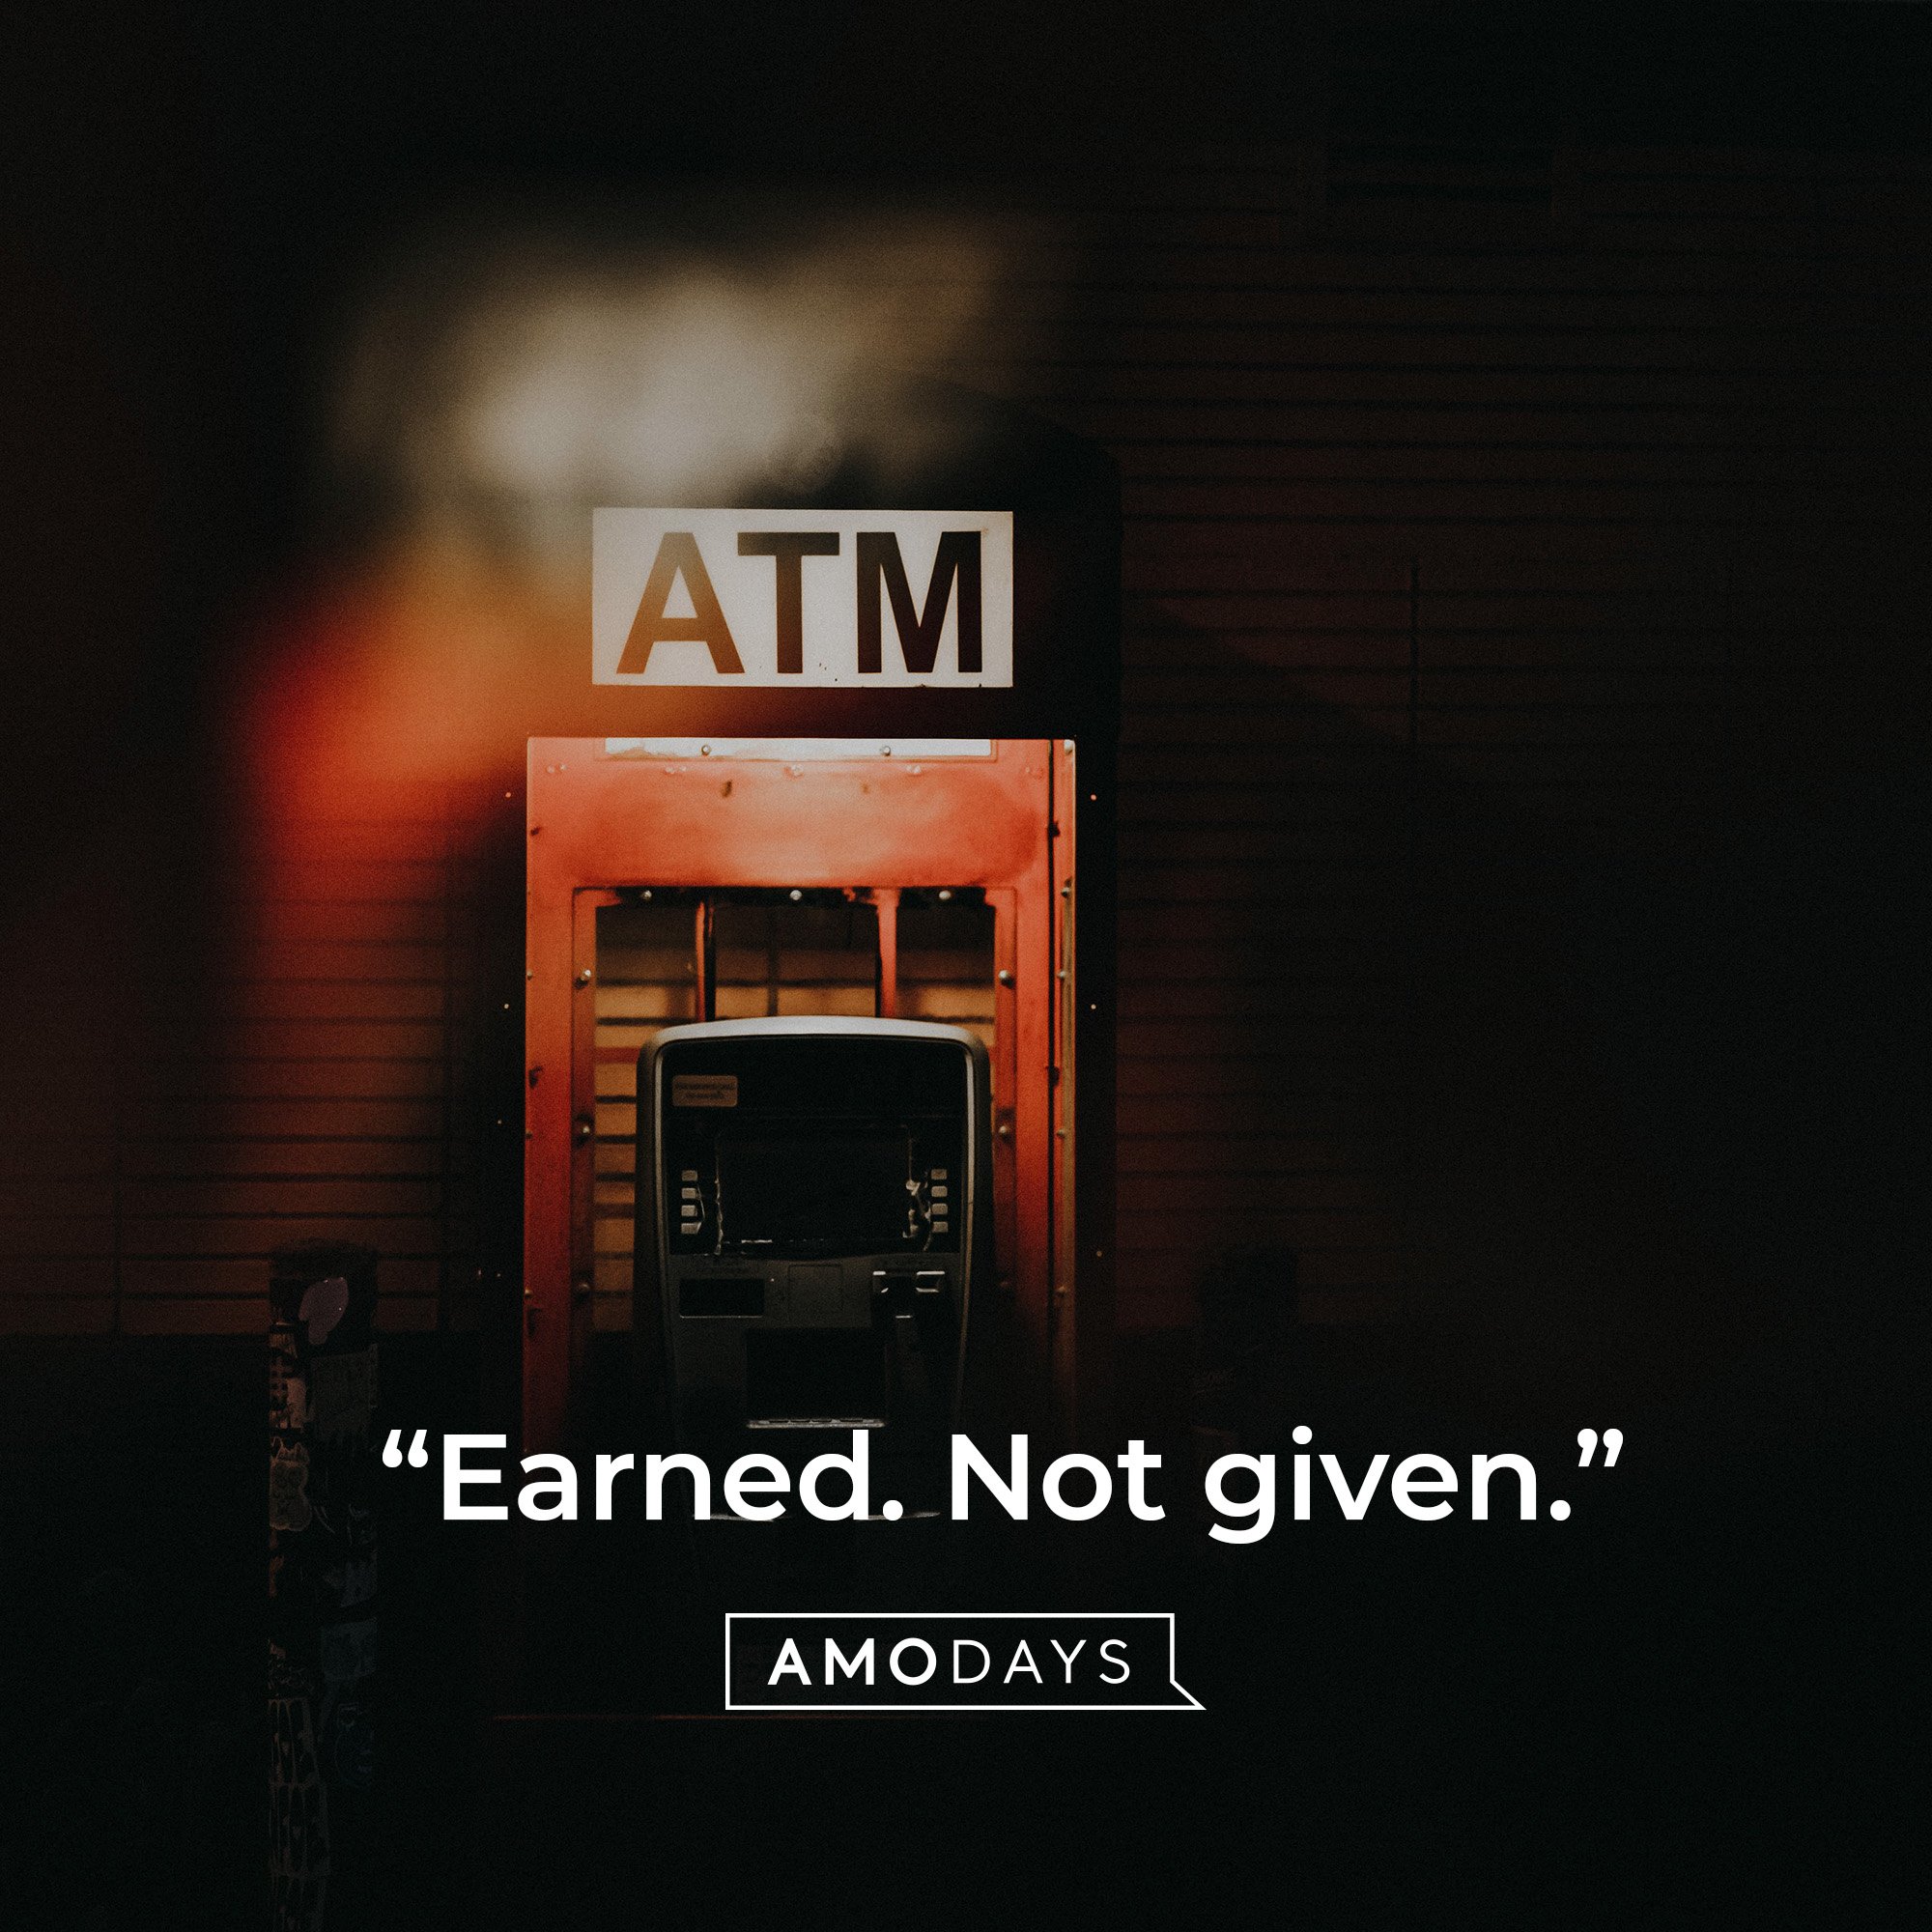 Nike’s quote: “Earned. Not given.” | Source: AmoDays